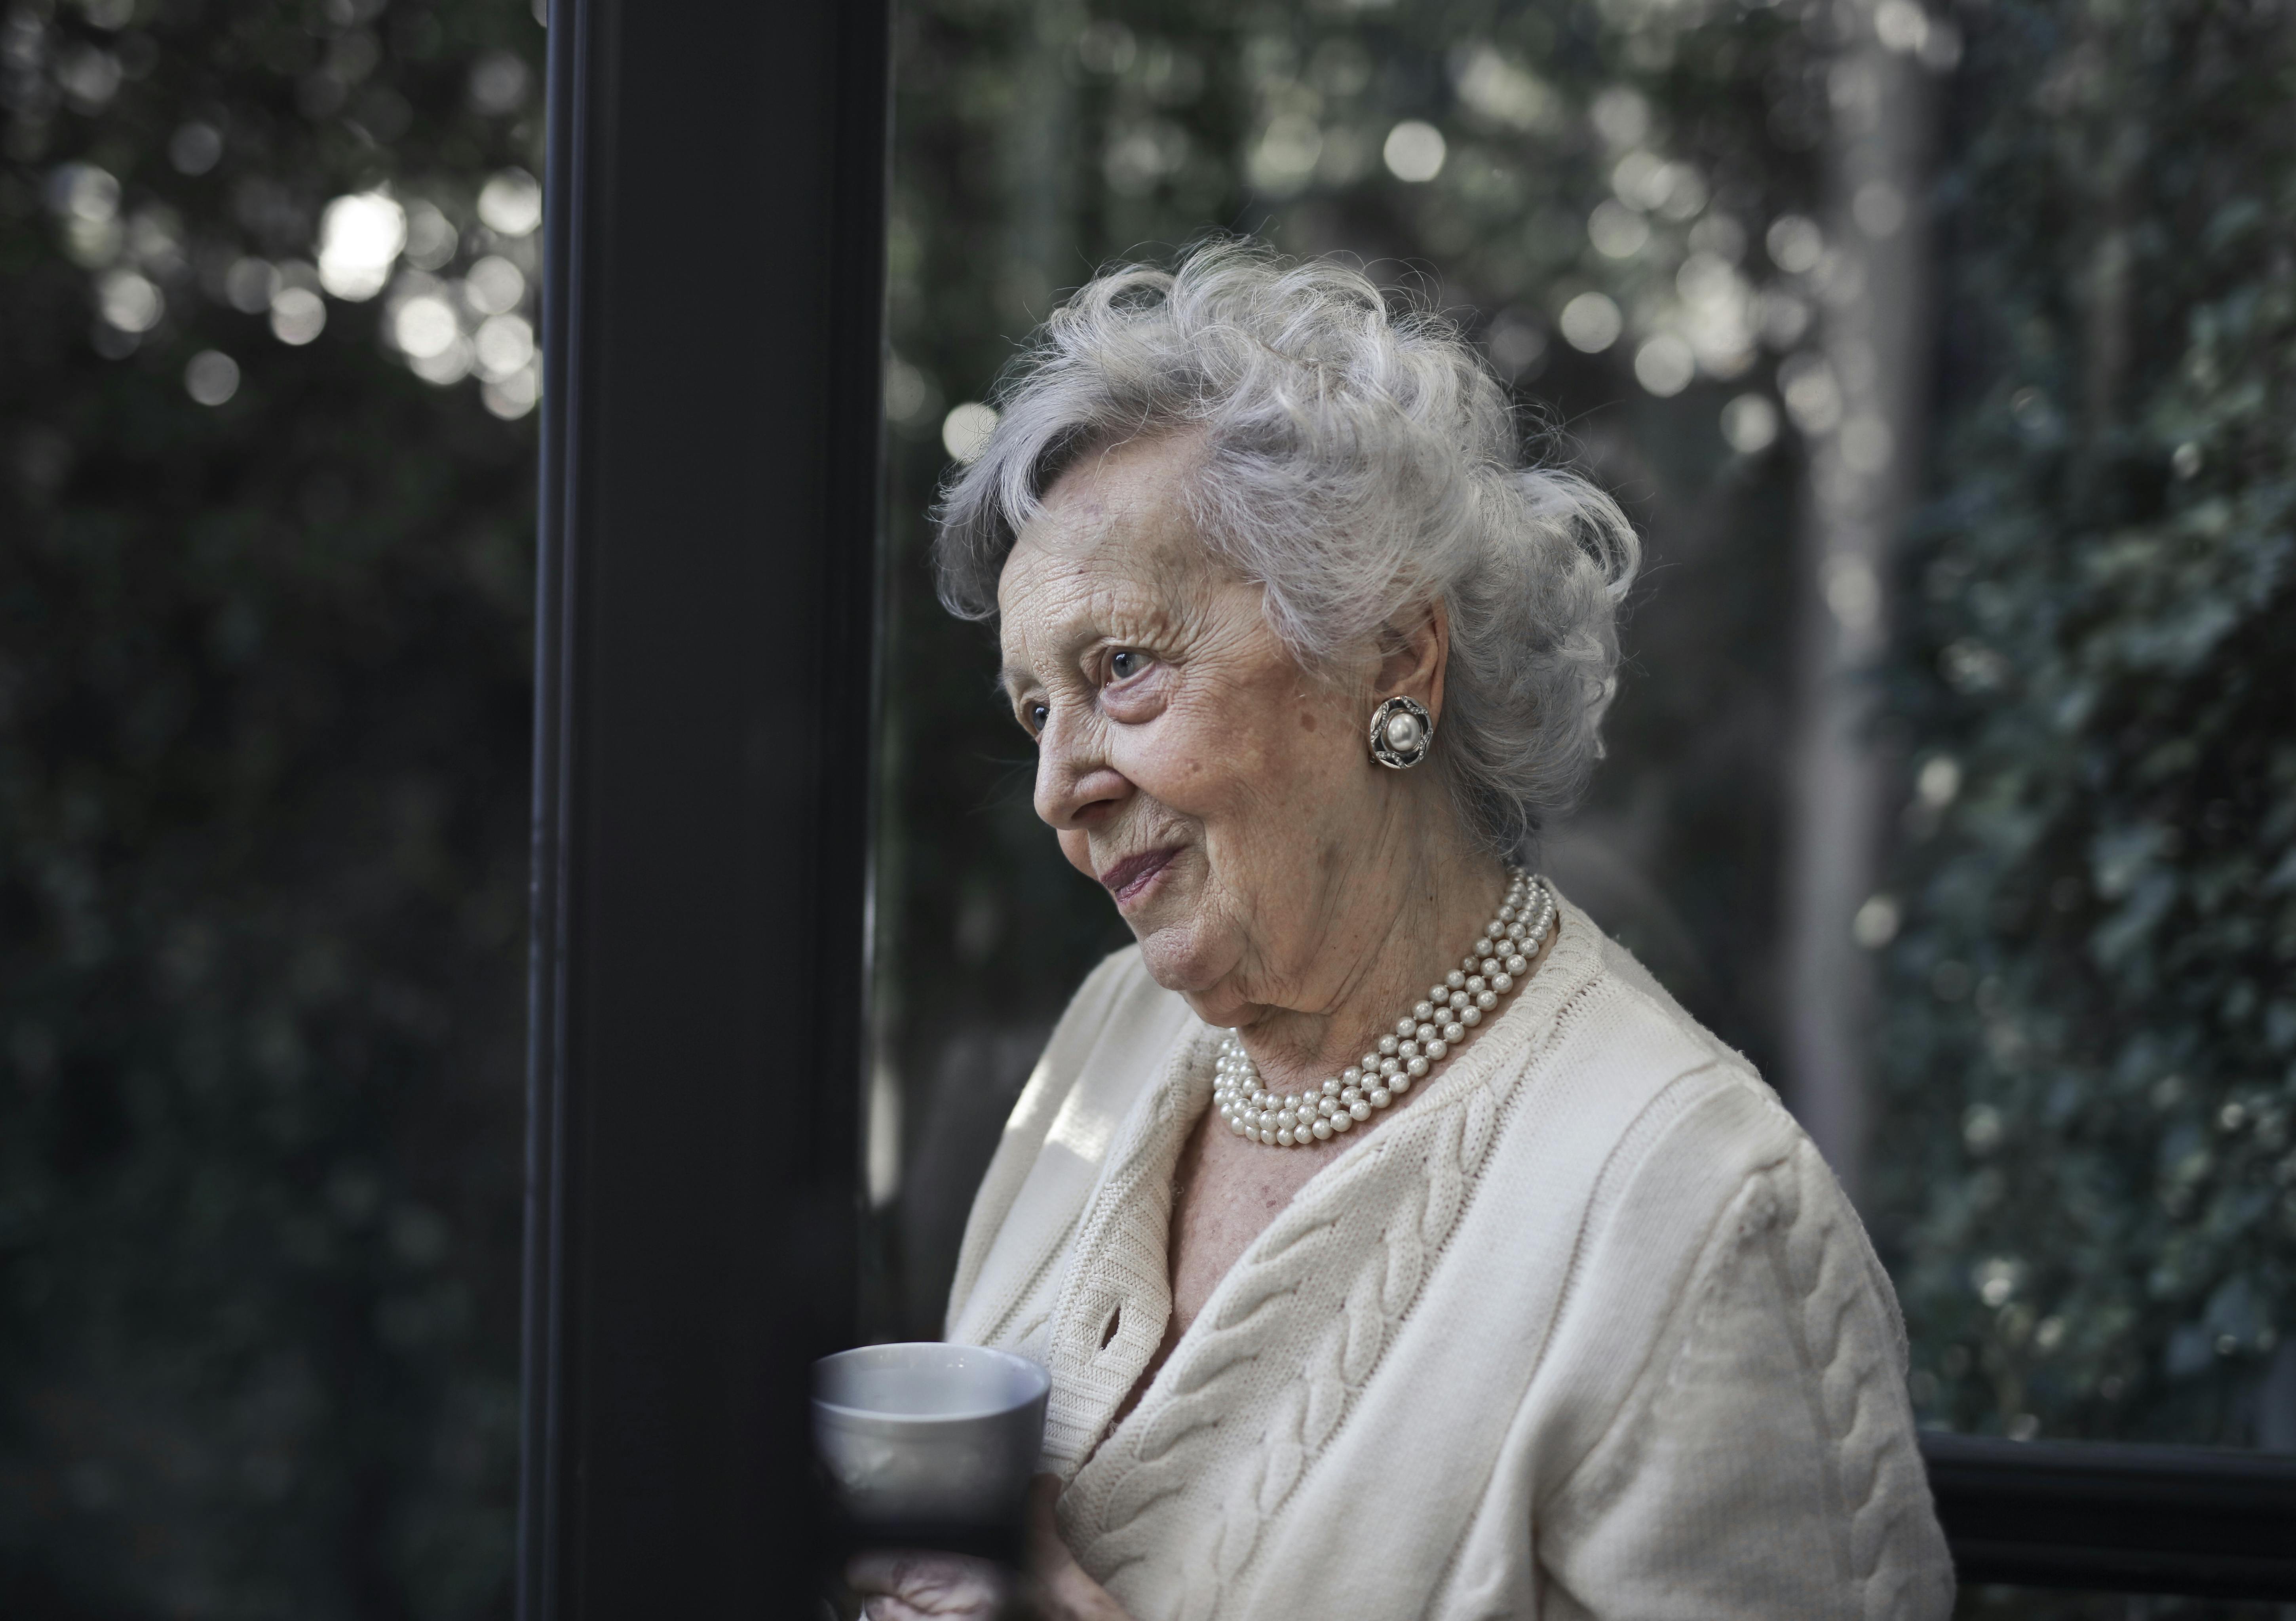 Elderly woman with a cup | Source: Pexels